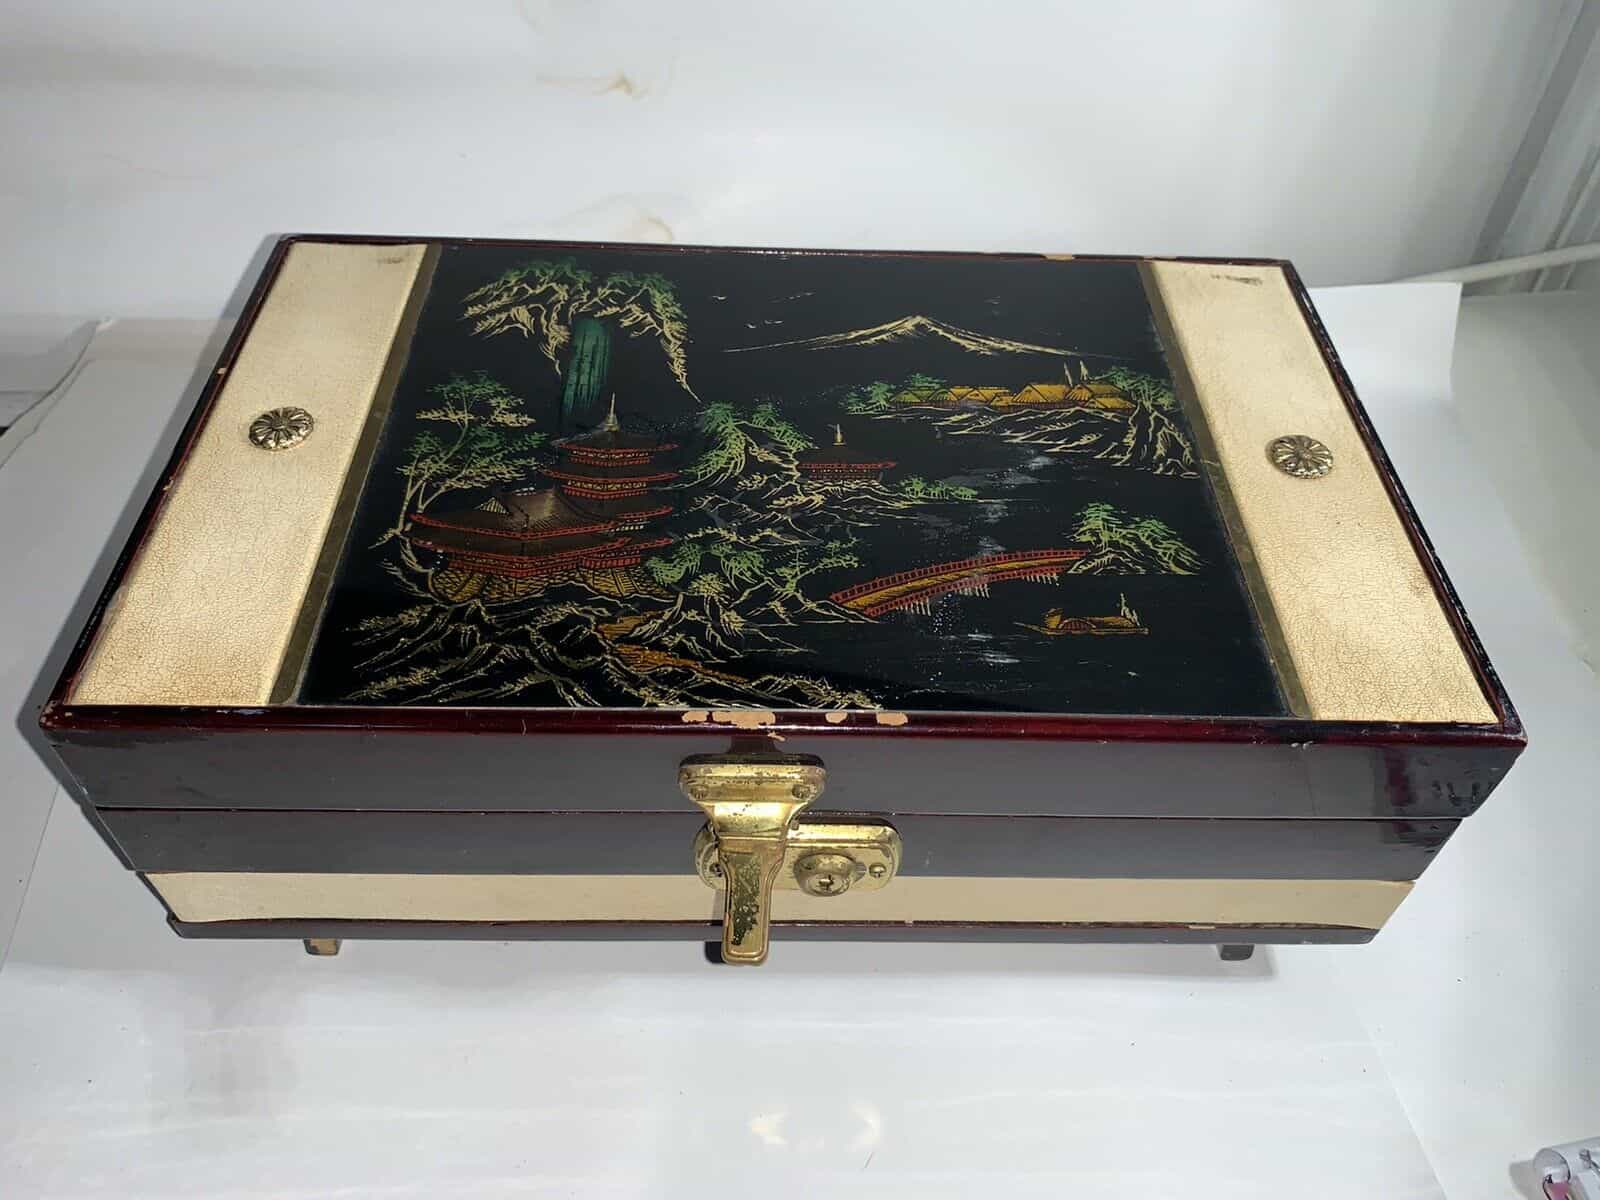 Japan Lacquer Jewelry Music Box With Ballerina And Mirrors 